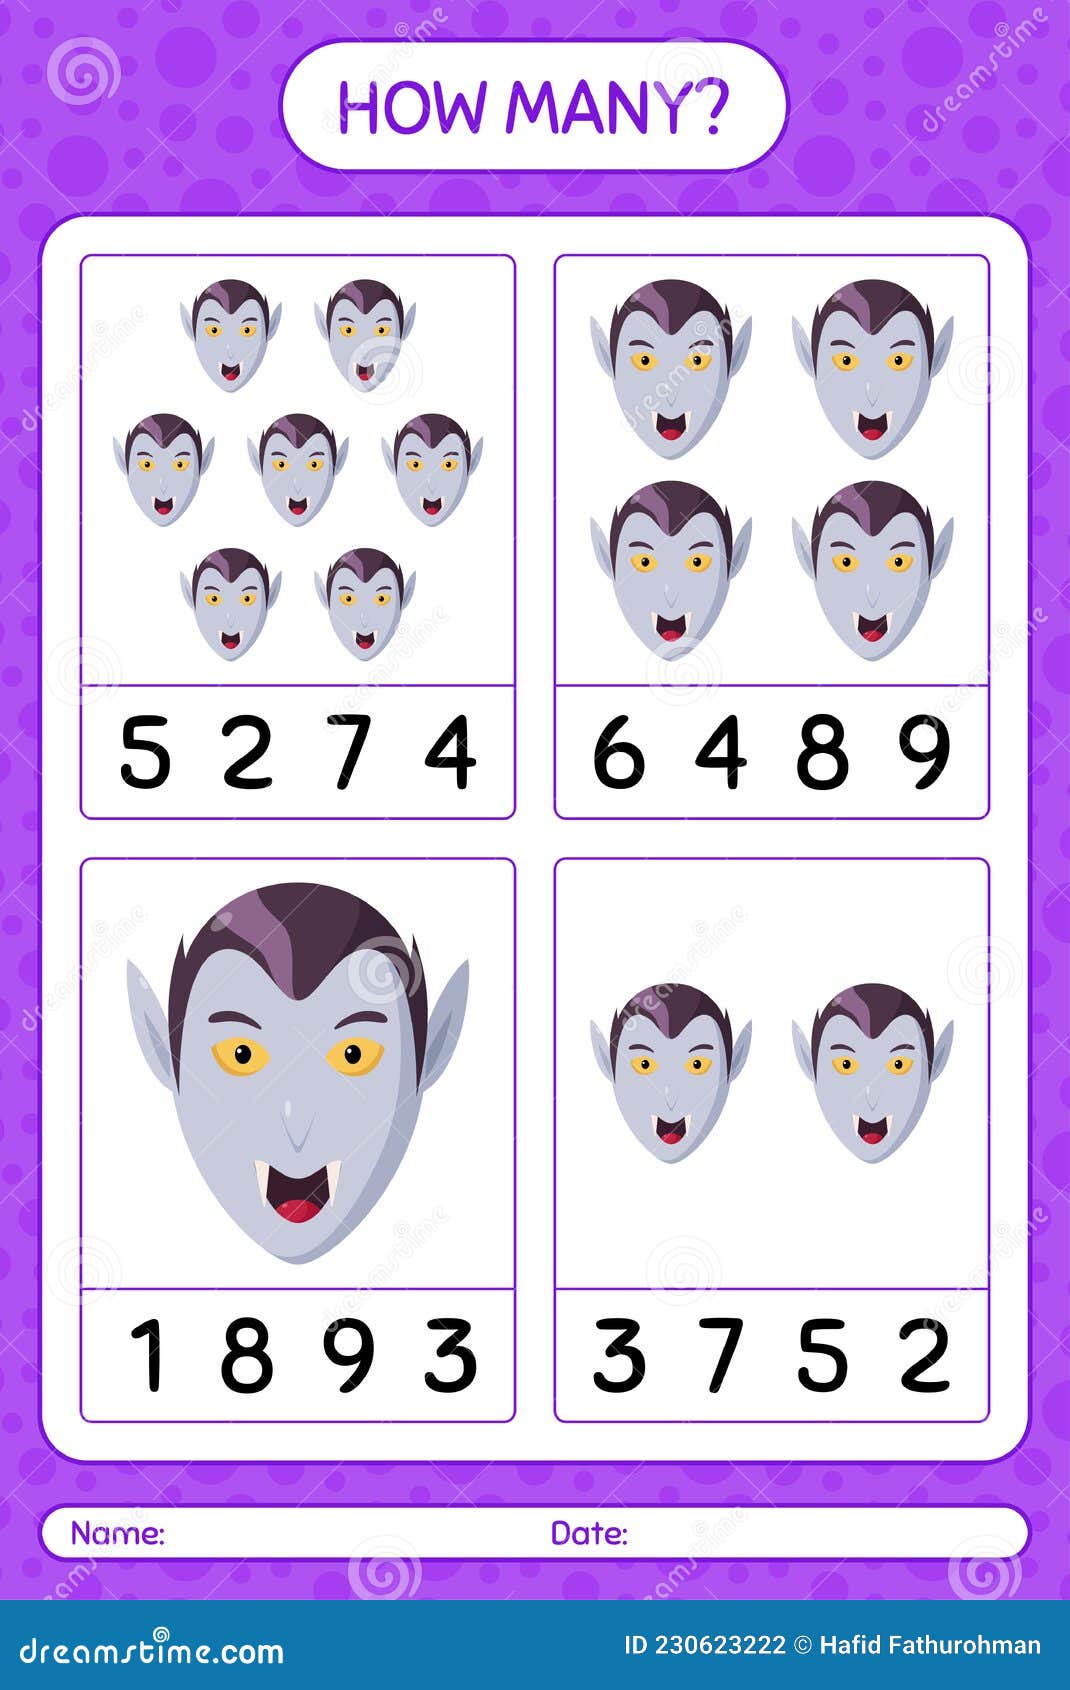 how-many-counting-game-with-vampire-worksheet-for-preschool-kids-kids-activity-sheet-stock